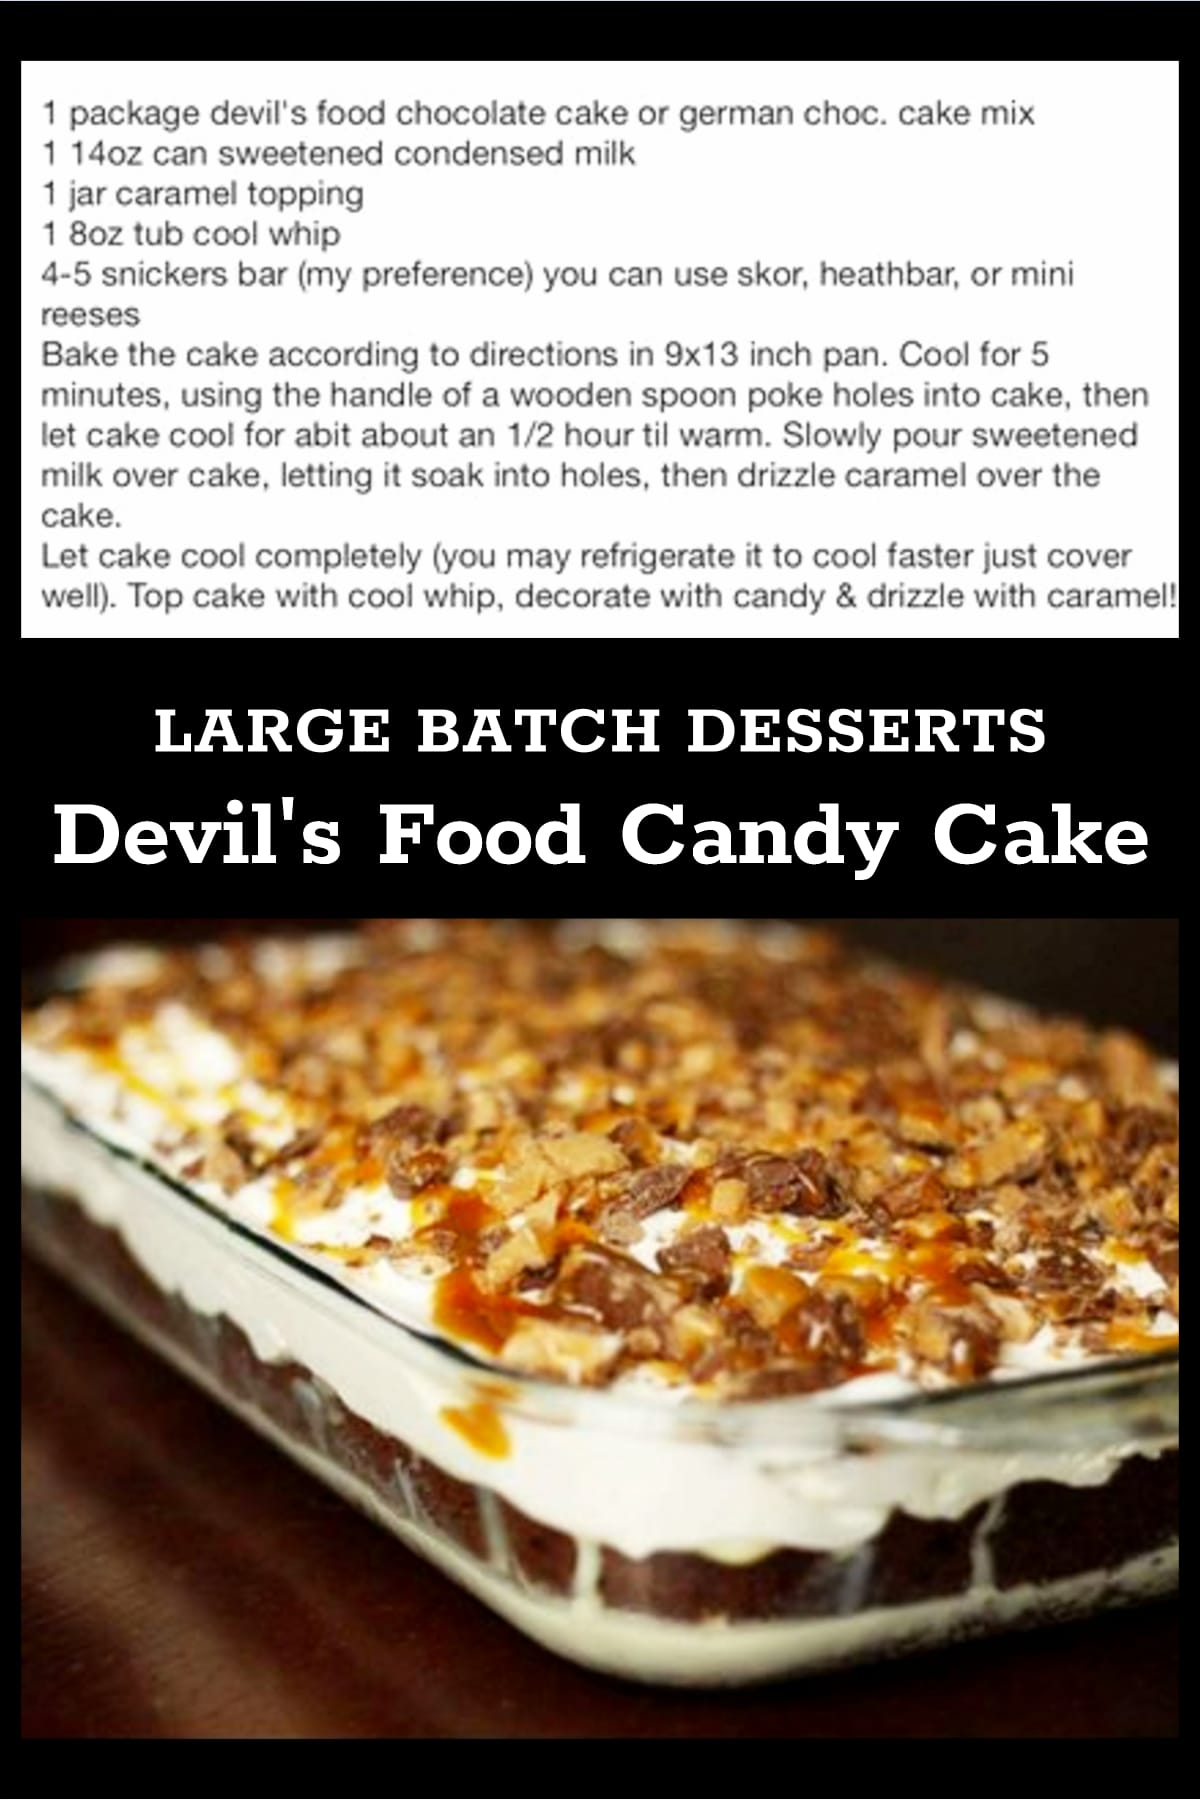 This Devil's Food Chocolate Candy Cake is such an EASY large batch dessert to make for your party or potluck crowd at work, church, Valentine's Day, Easter, Mother's Day - even for a family reunion or block party